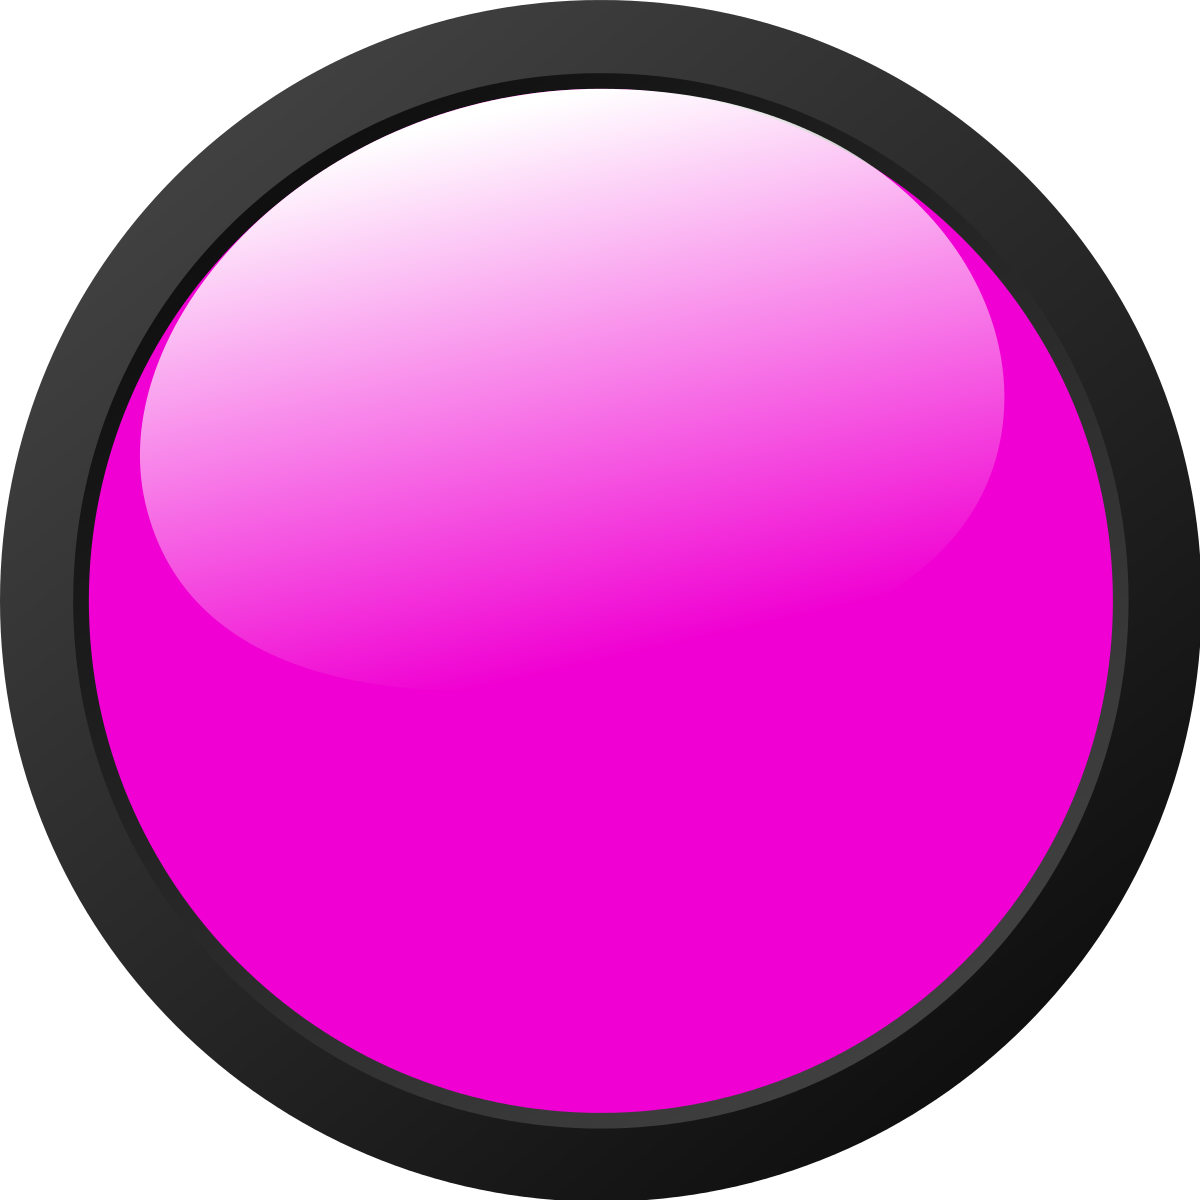 A Pink Button With Black Border